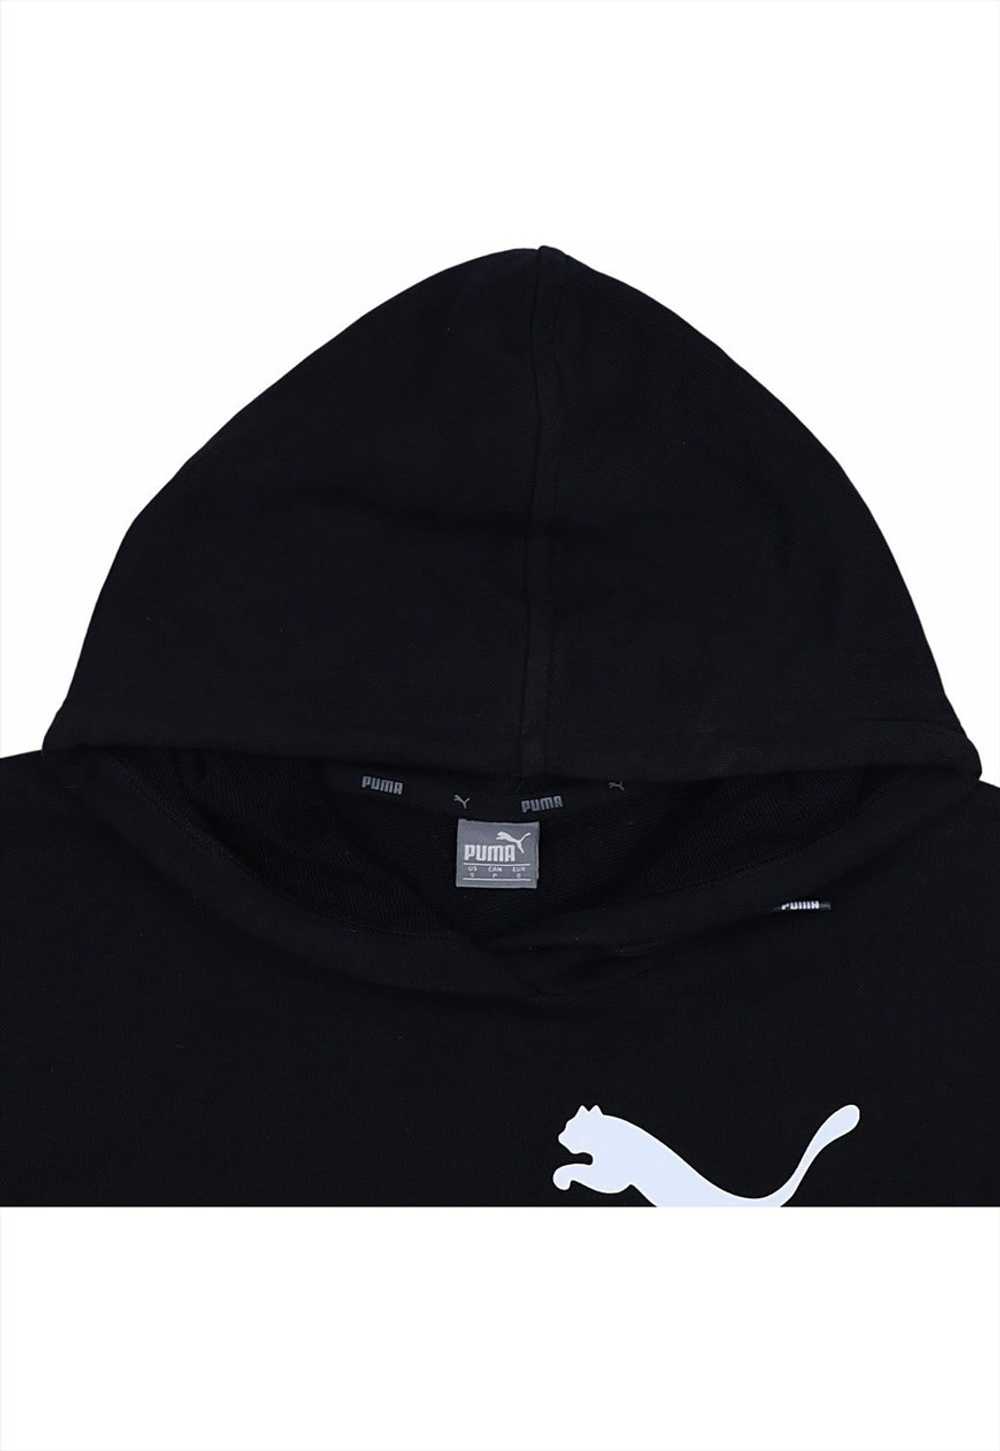 Vintage 90's Puma Hoodie Spellout Pullover - image 4